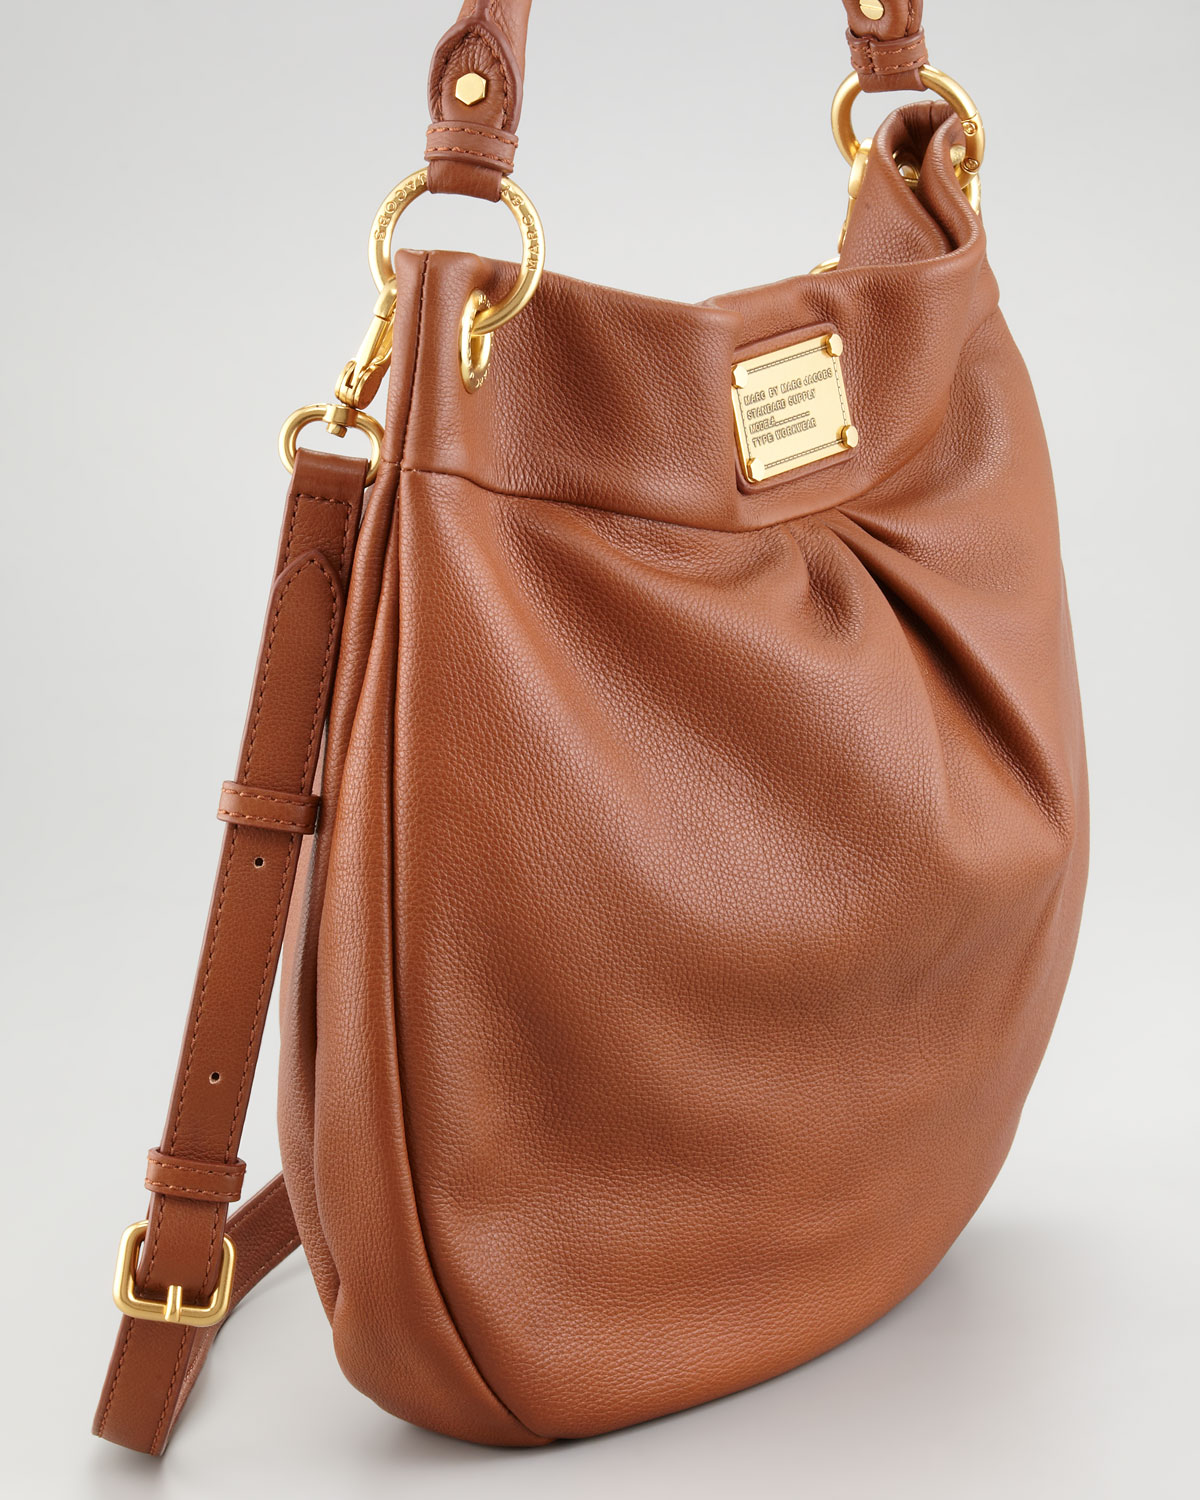 Marc By Marc Jacobs Classic Q Hillier Hobo Bag in Brown - Lyst